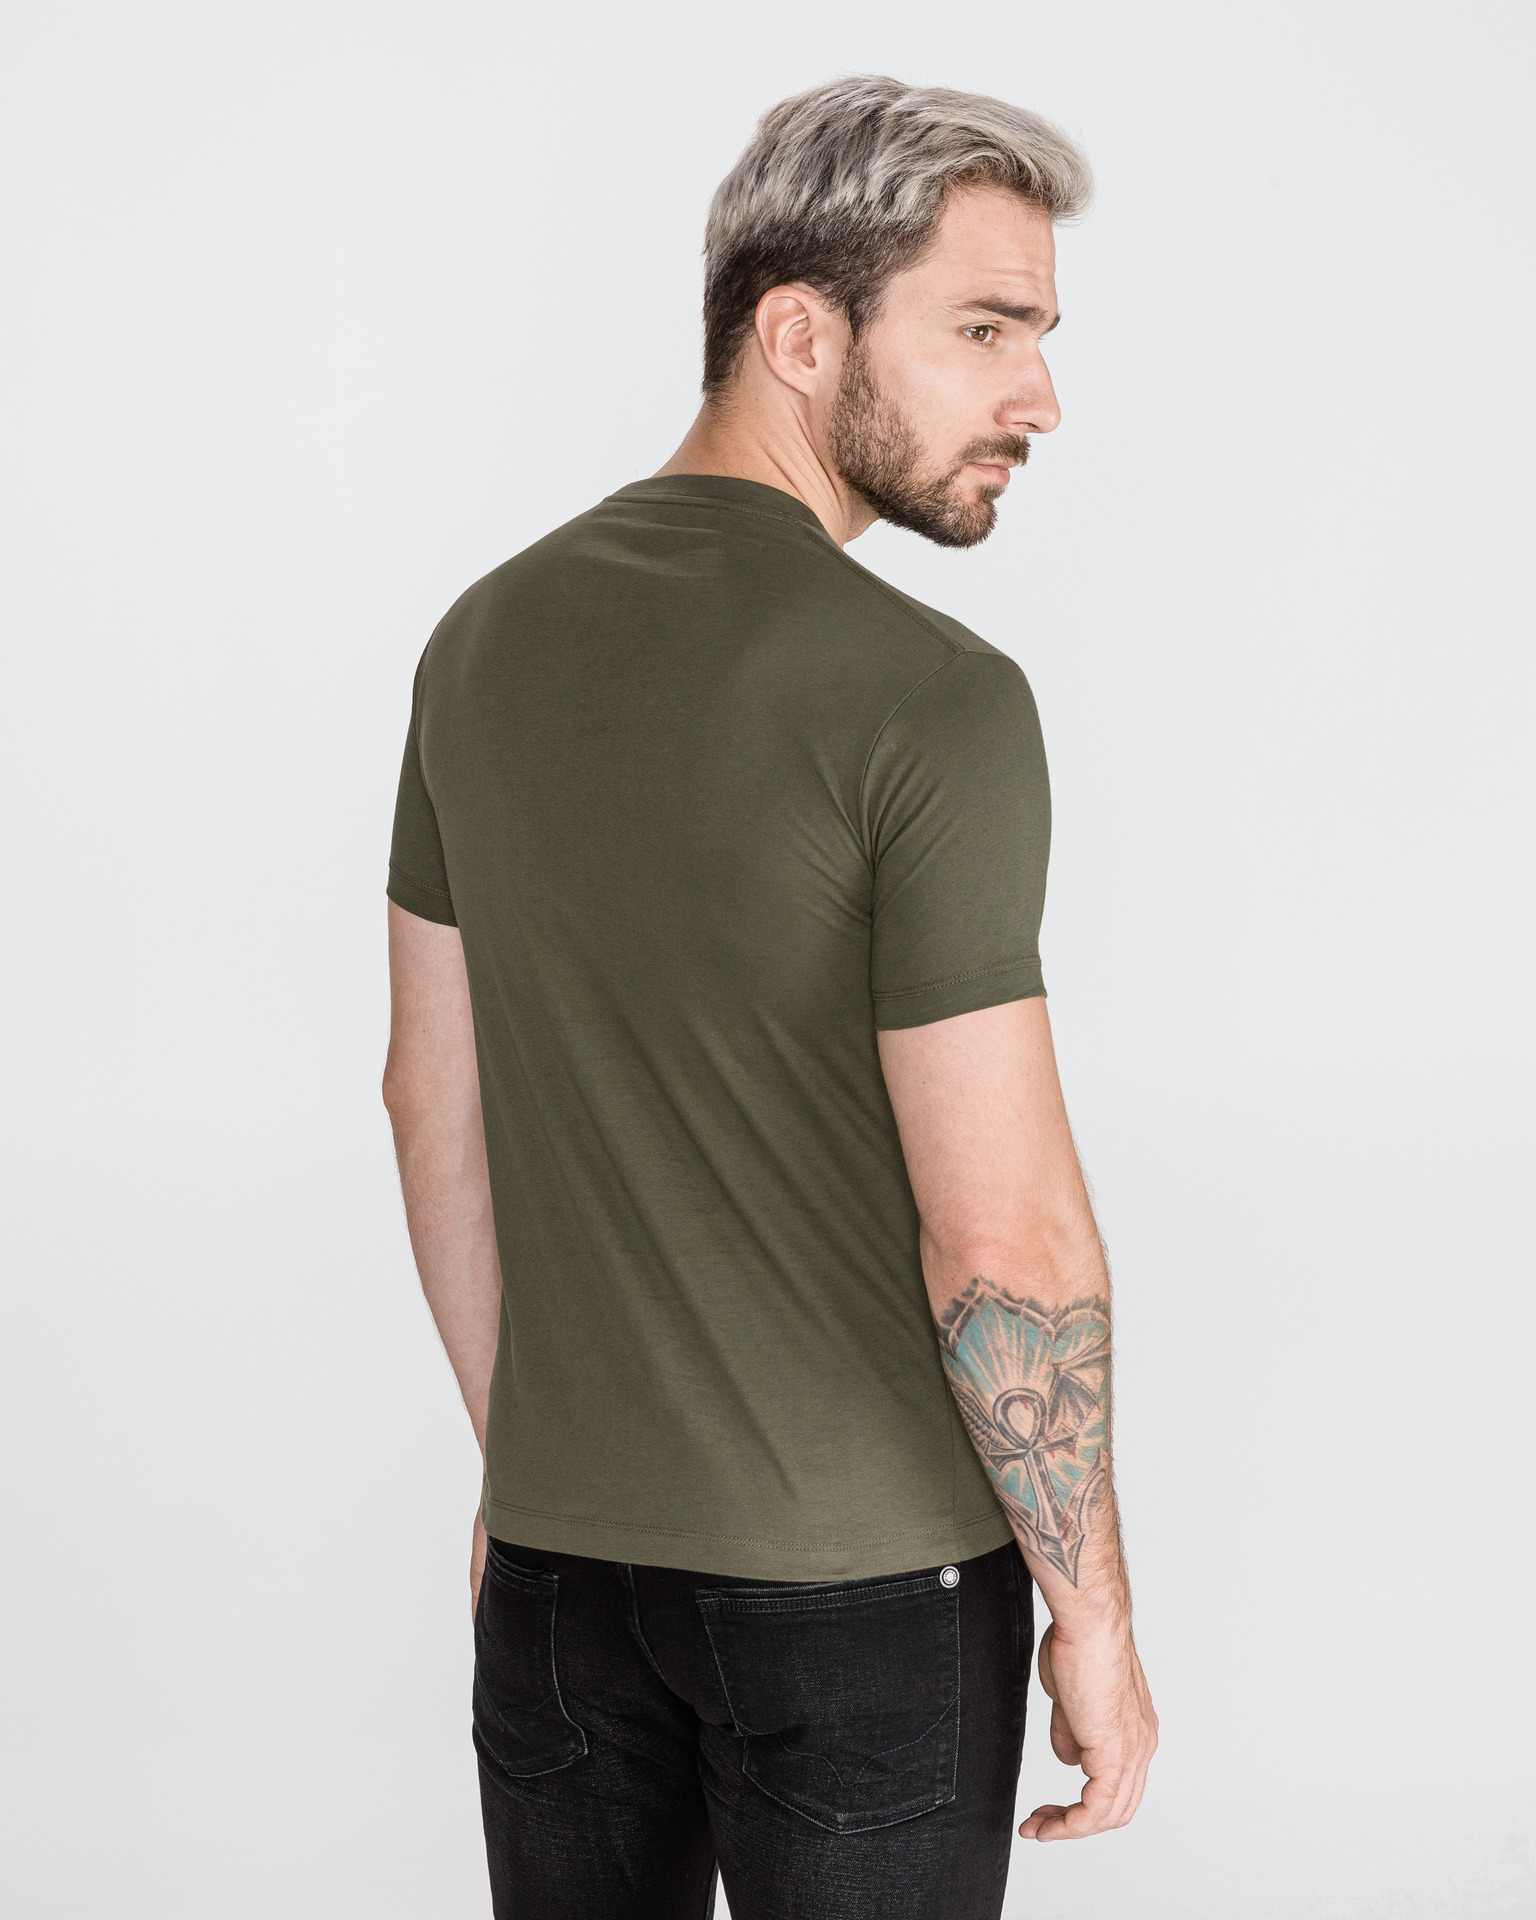 Pepe Jeans - Charing T-shirt